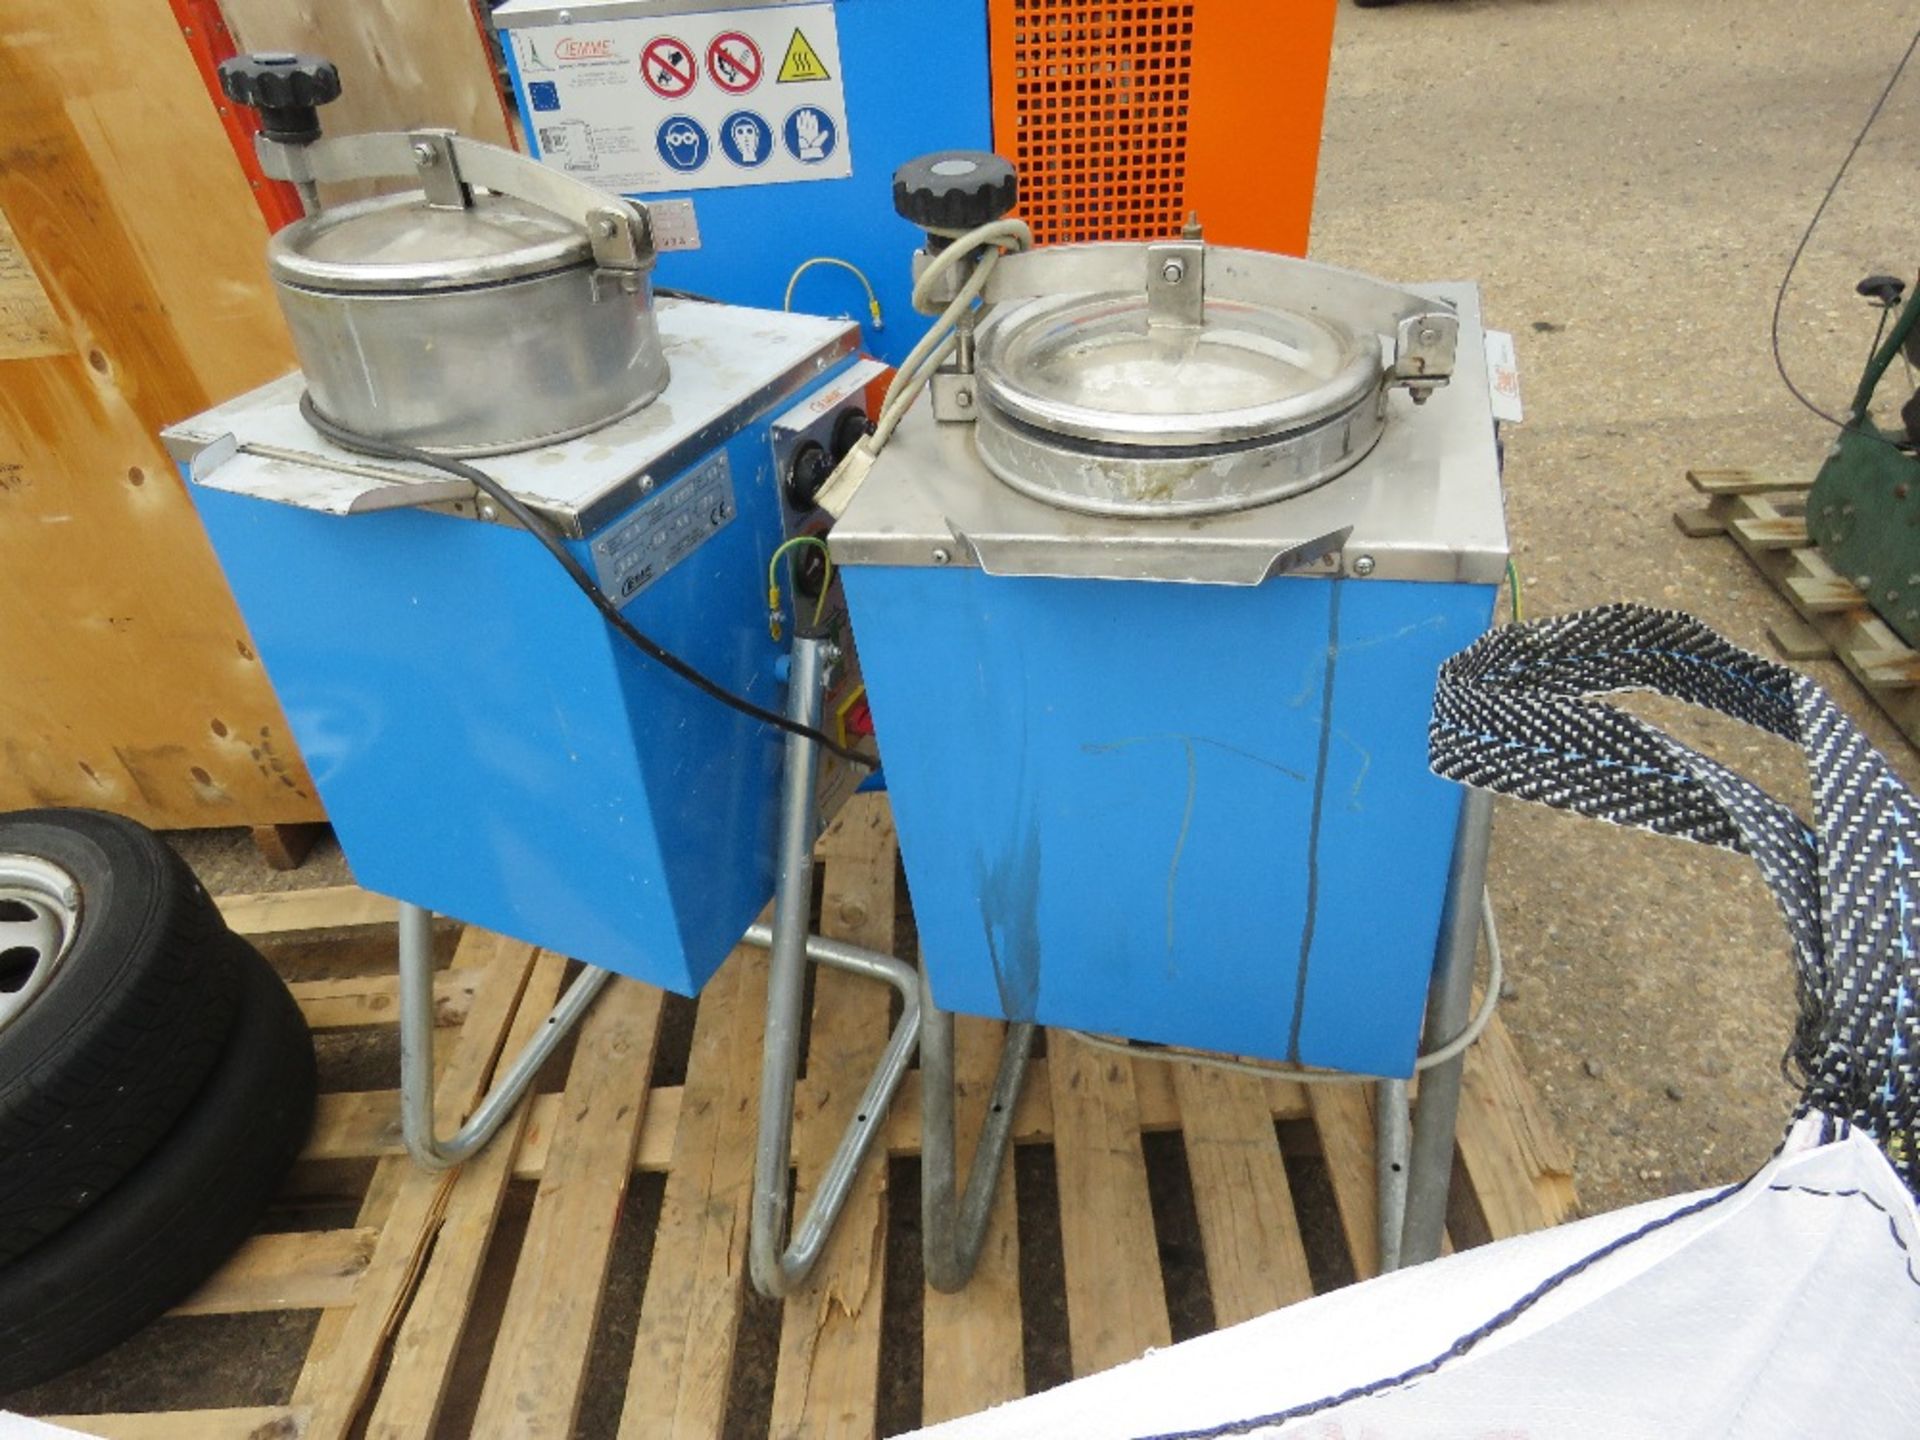 2 X CIEMME K2 SOLVENT RECOVERY UNITS, 220VOLT POWERED. SOURCED FROM COMPANY LIQUIDATION. - Image 4 of 6